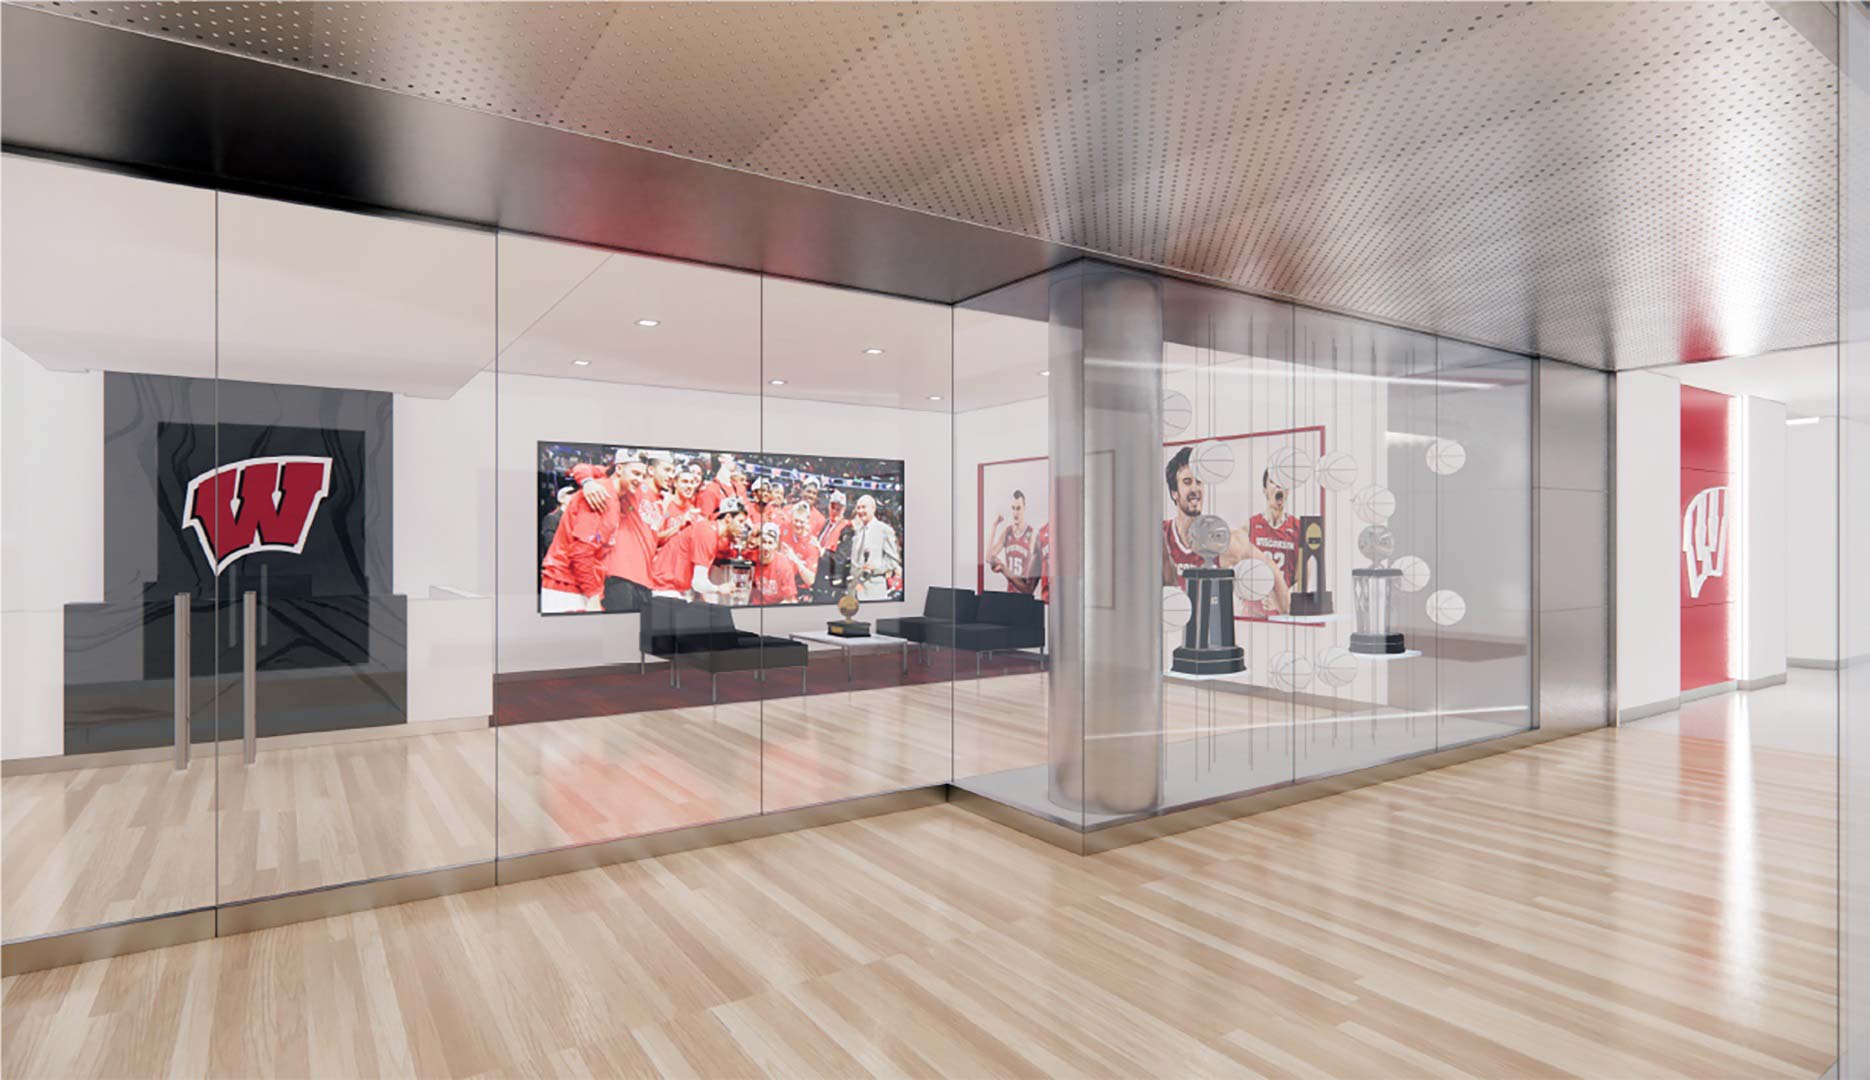 A rendering of a large area with two spaces. The first space in the foreground looks like a hallway with wood floors and a metal accent ceiling. In the second space in the background there is a lounge area with men's basketball photos on the walls and some trophies. The two spaces are separated by large floor to ceiling glass windows and doors.